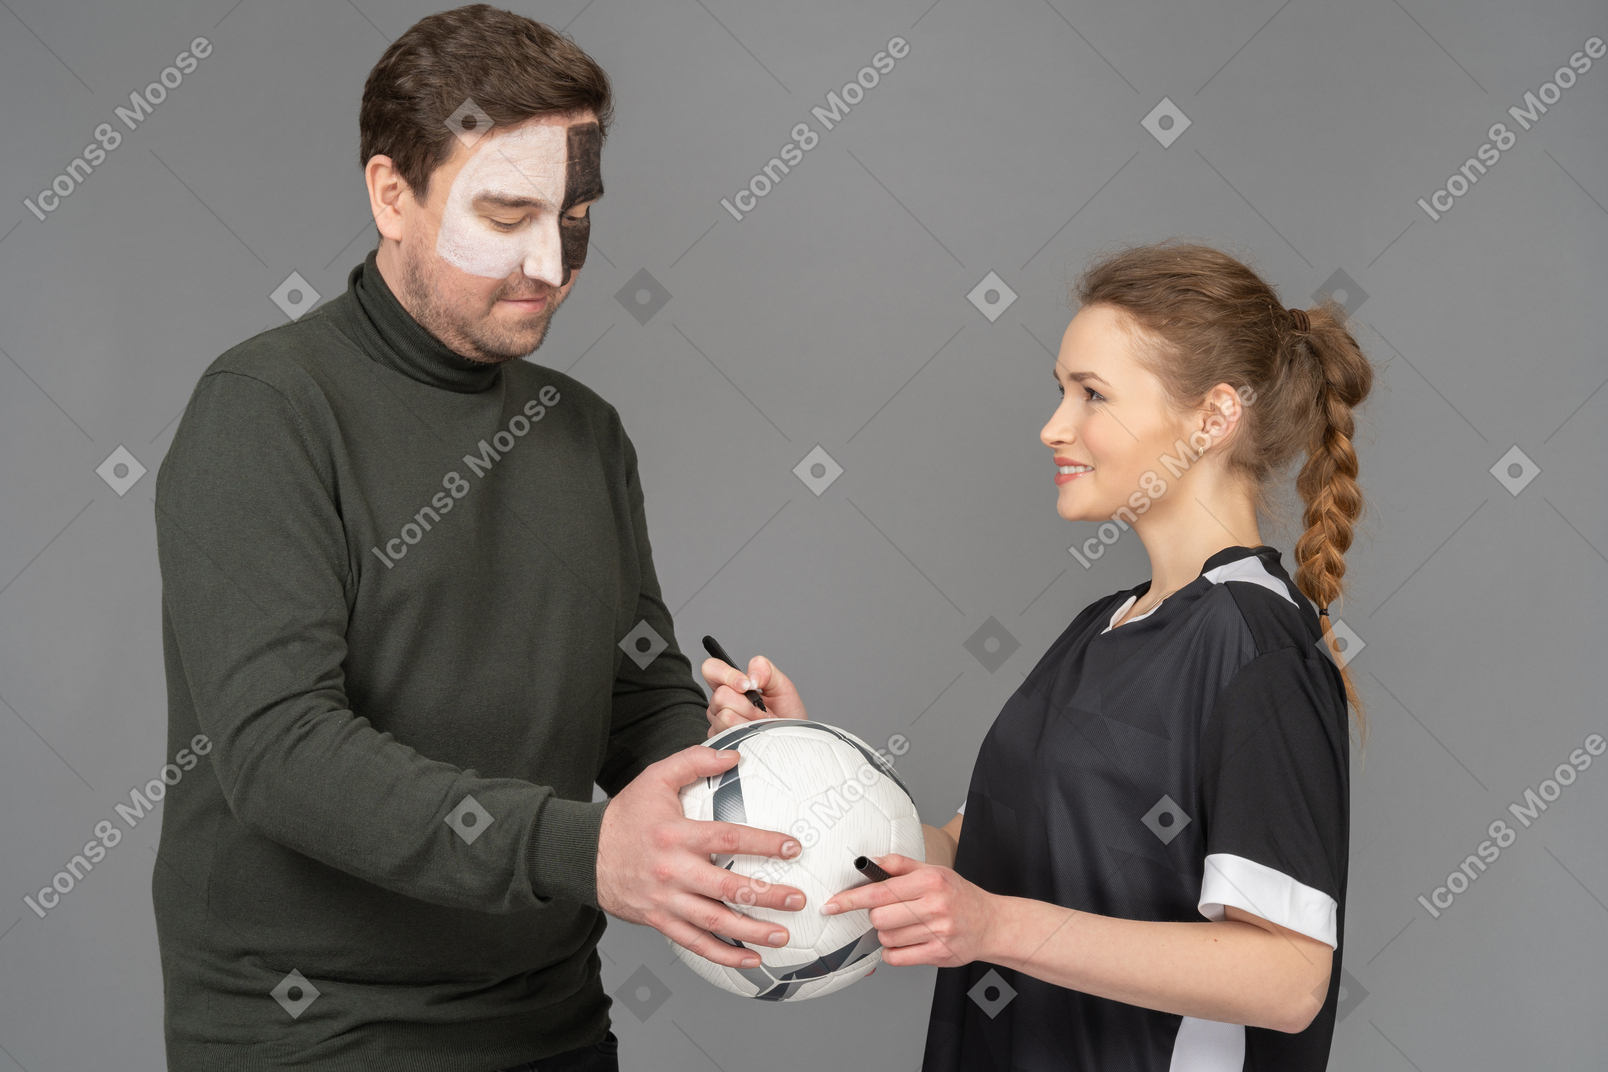 Female football player signing a ball for the fan